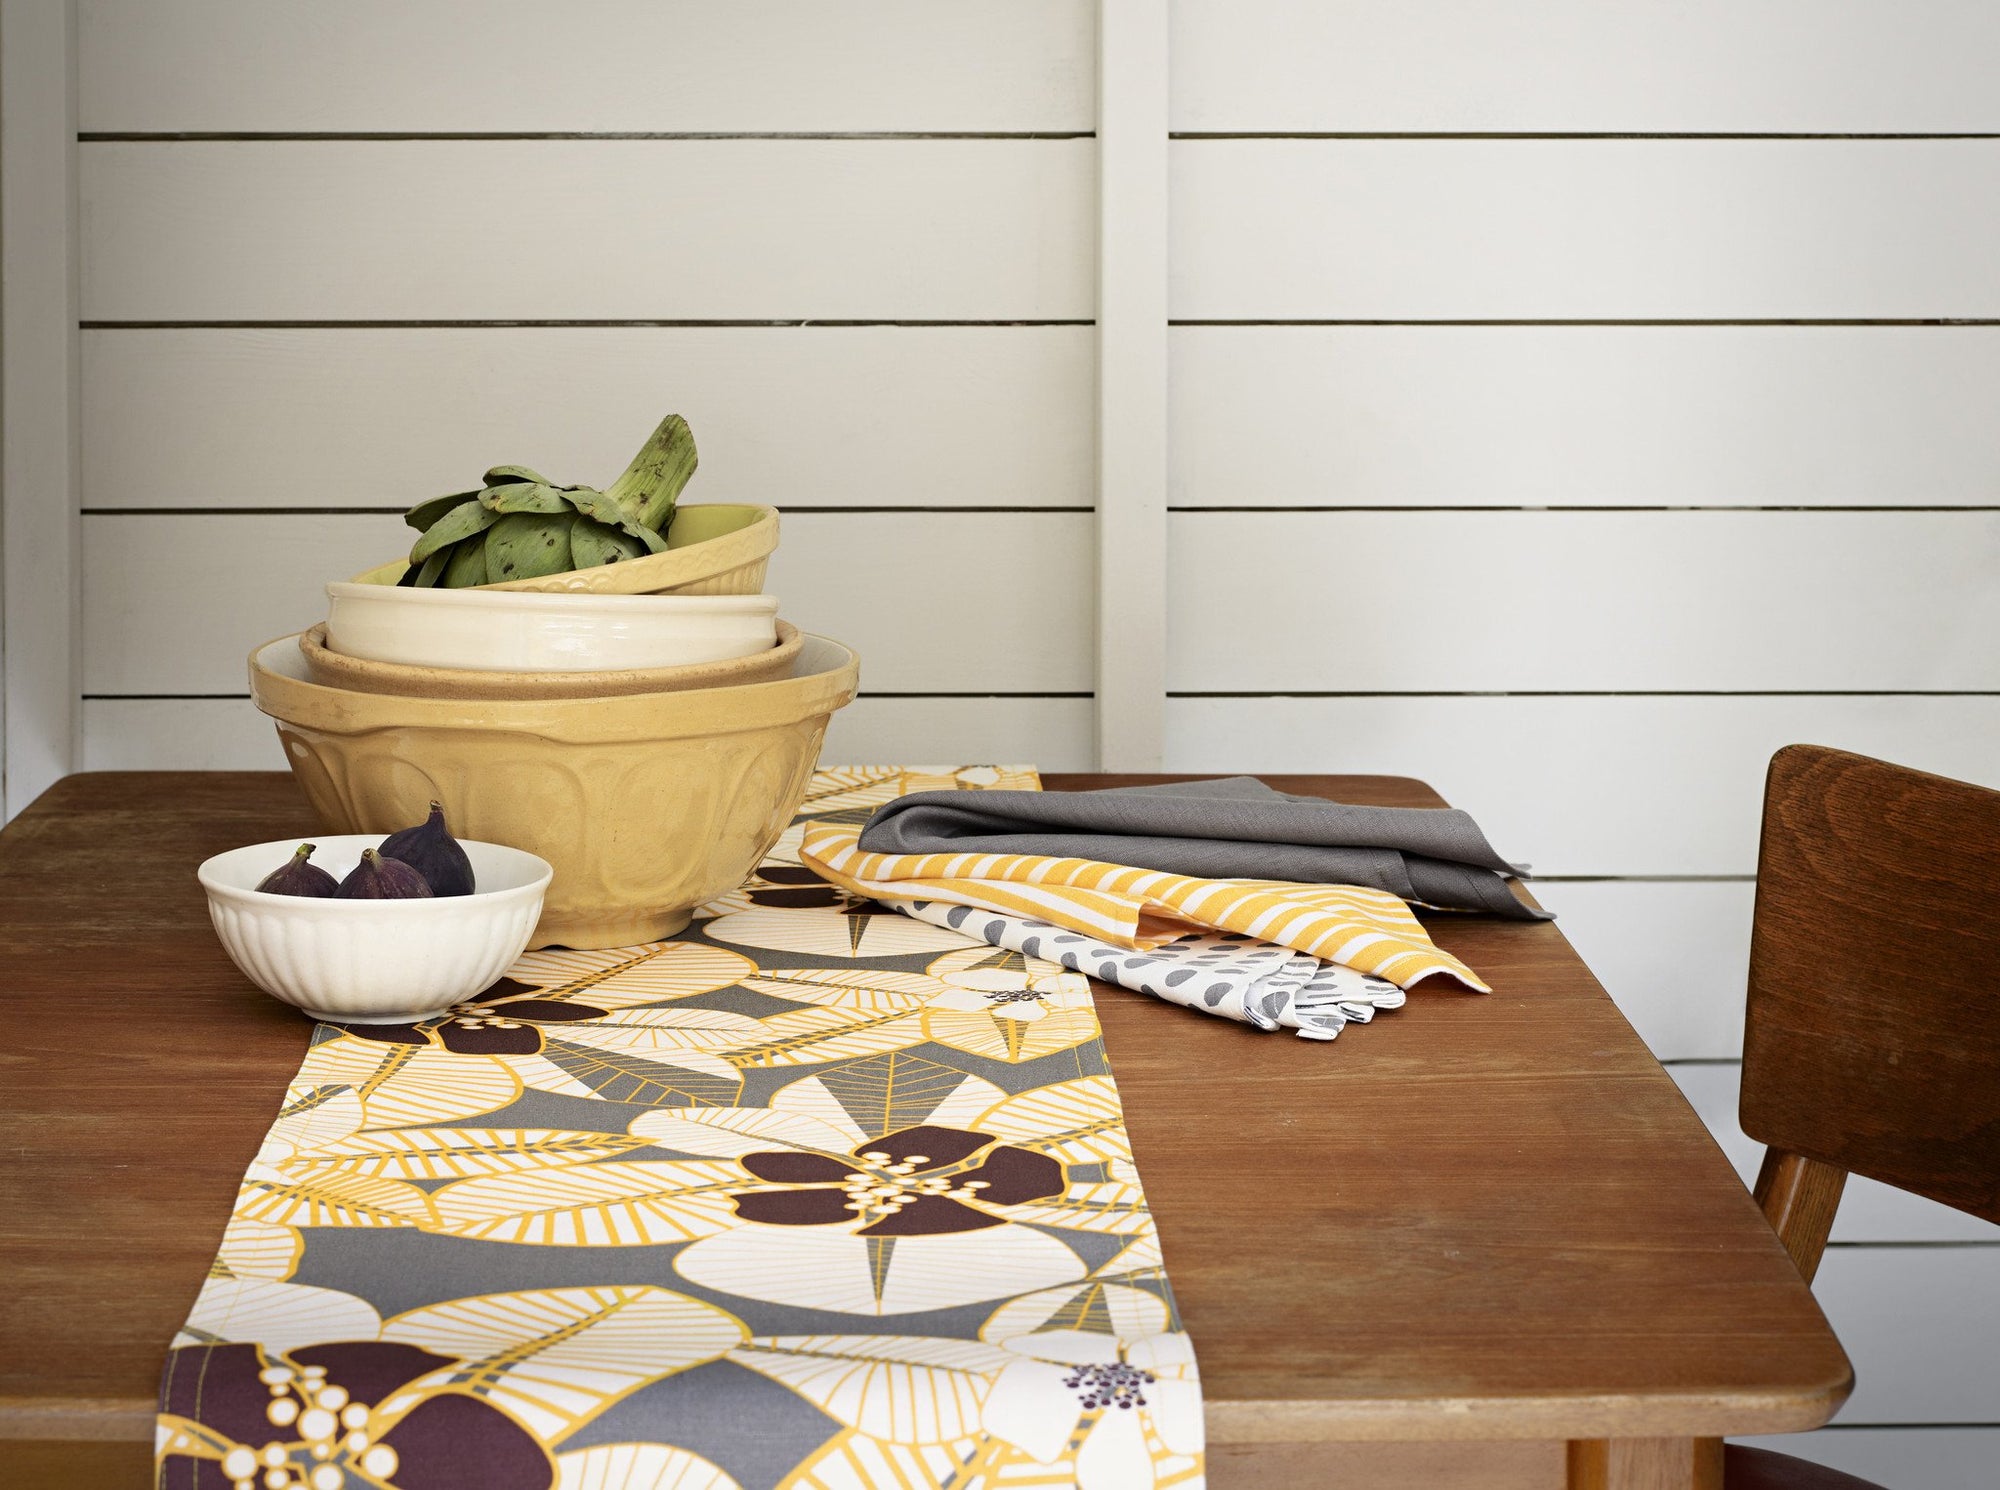 Table runners in bold modern patterns ships from Canada worldwide including the USA